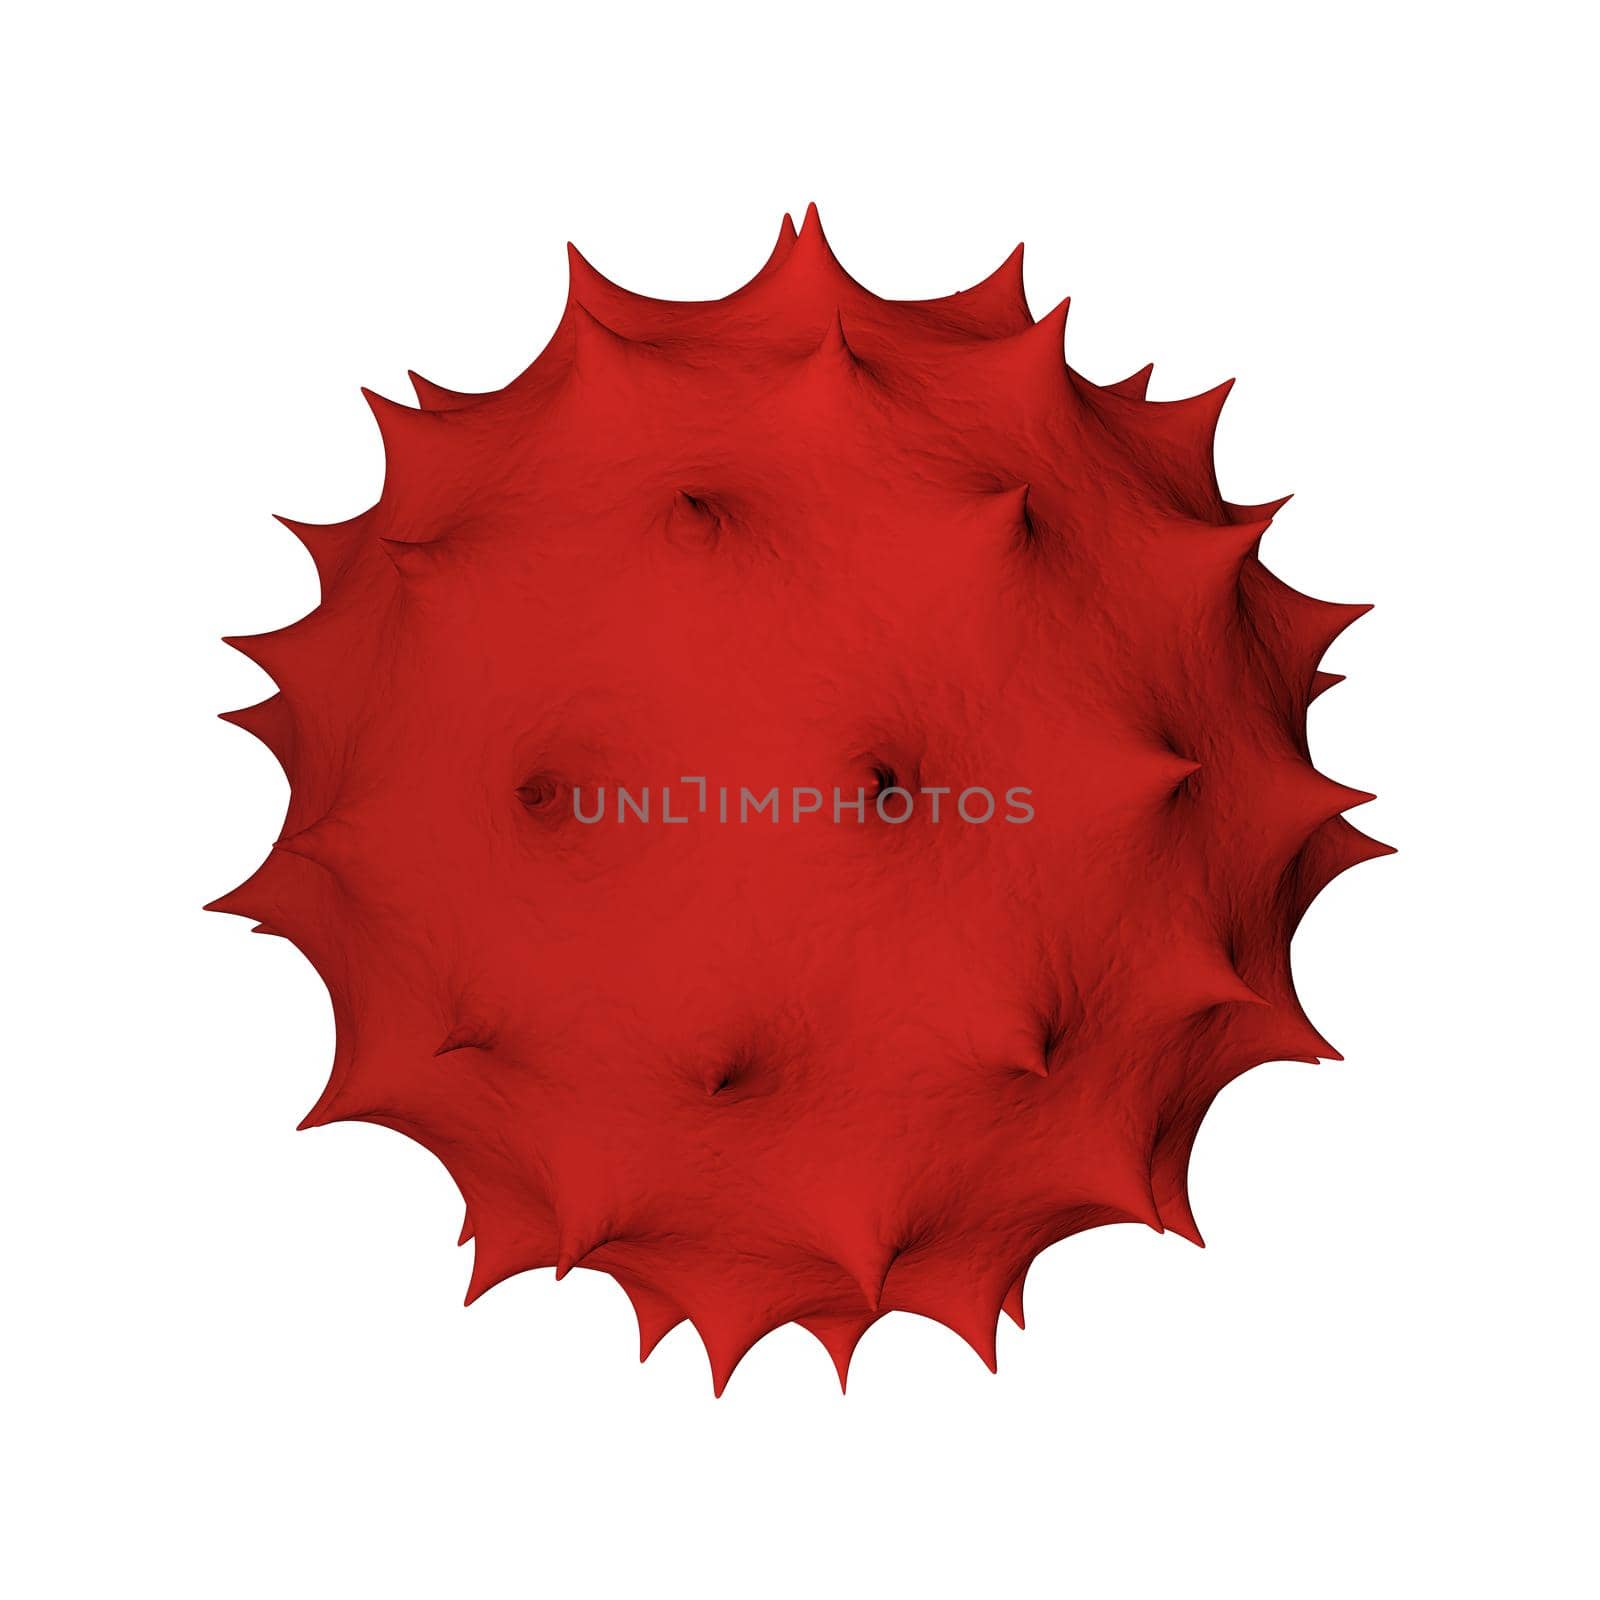 Illustration of a virus - 3d rendered - isolated on background